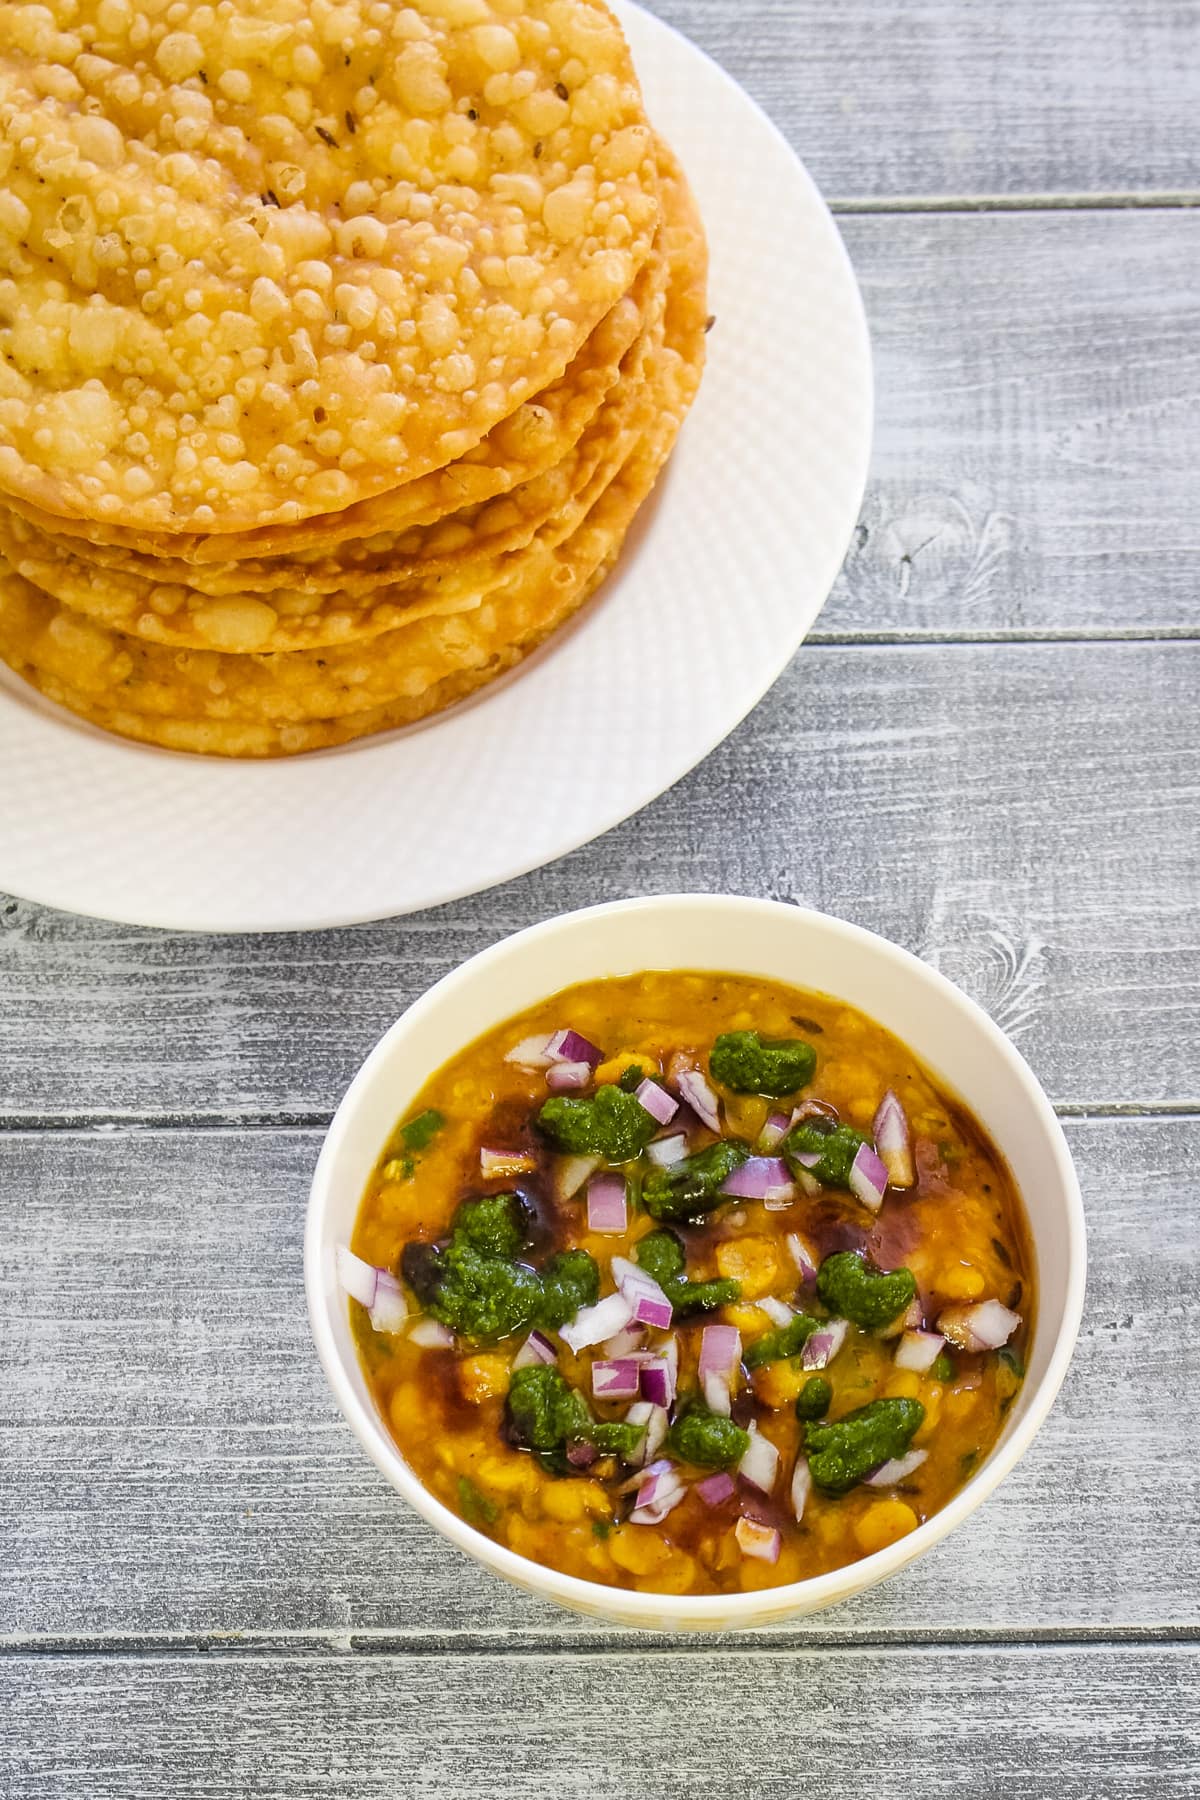 Dal pakwan is served with a bowl of dal with toppings of chutney and onion.